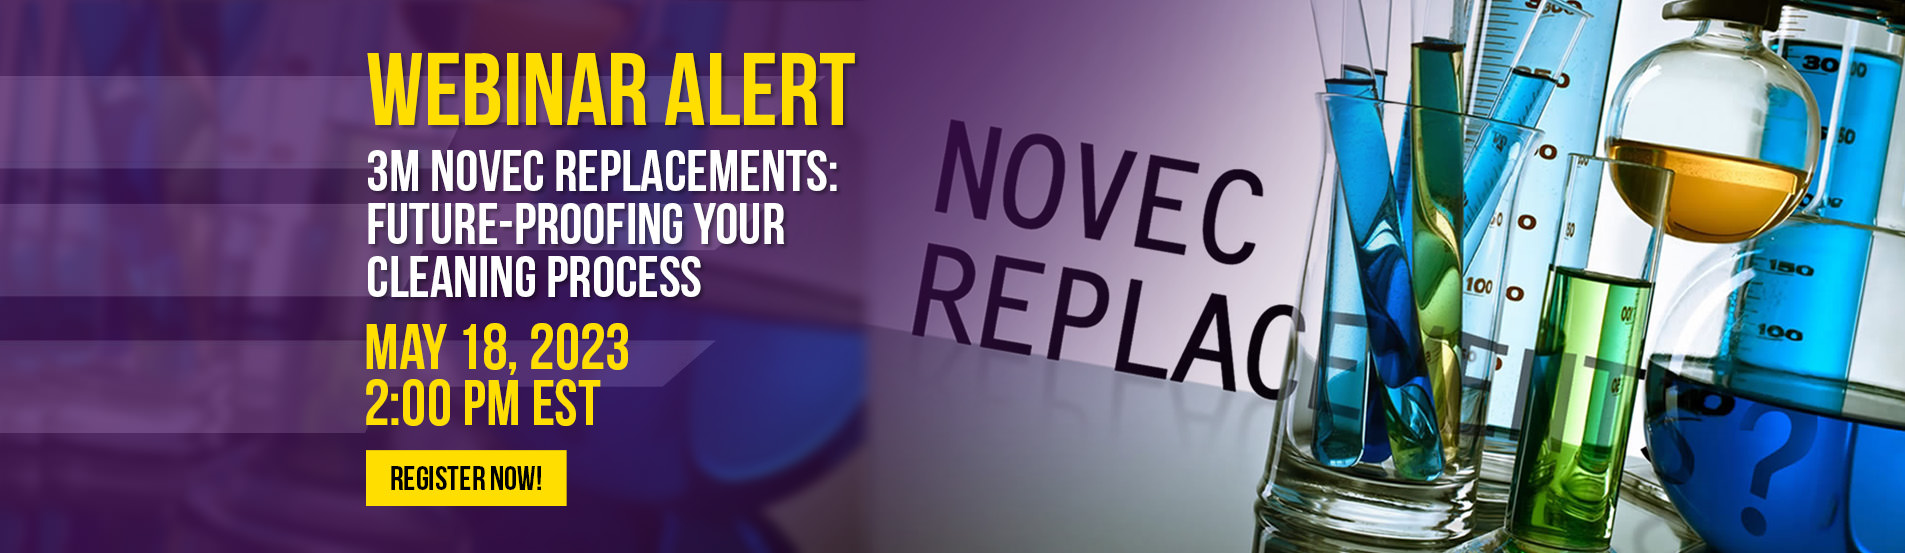 3M Novec Replacements: Future-Proofing Your Cleaning Process